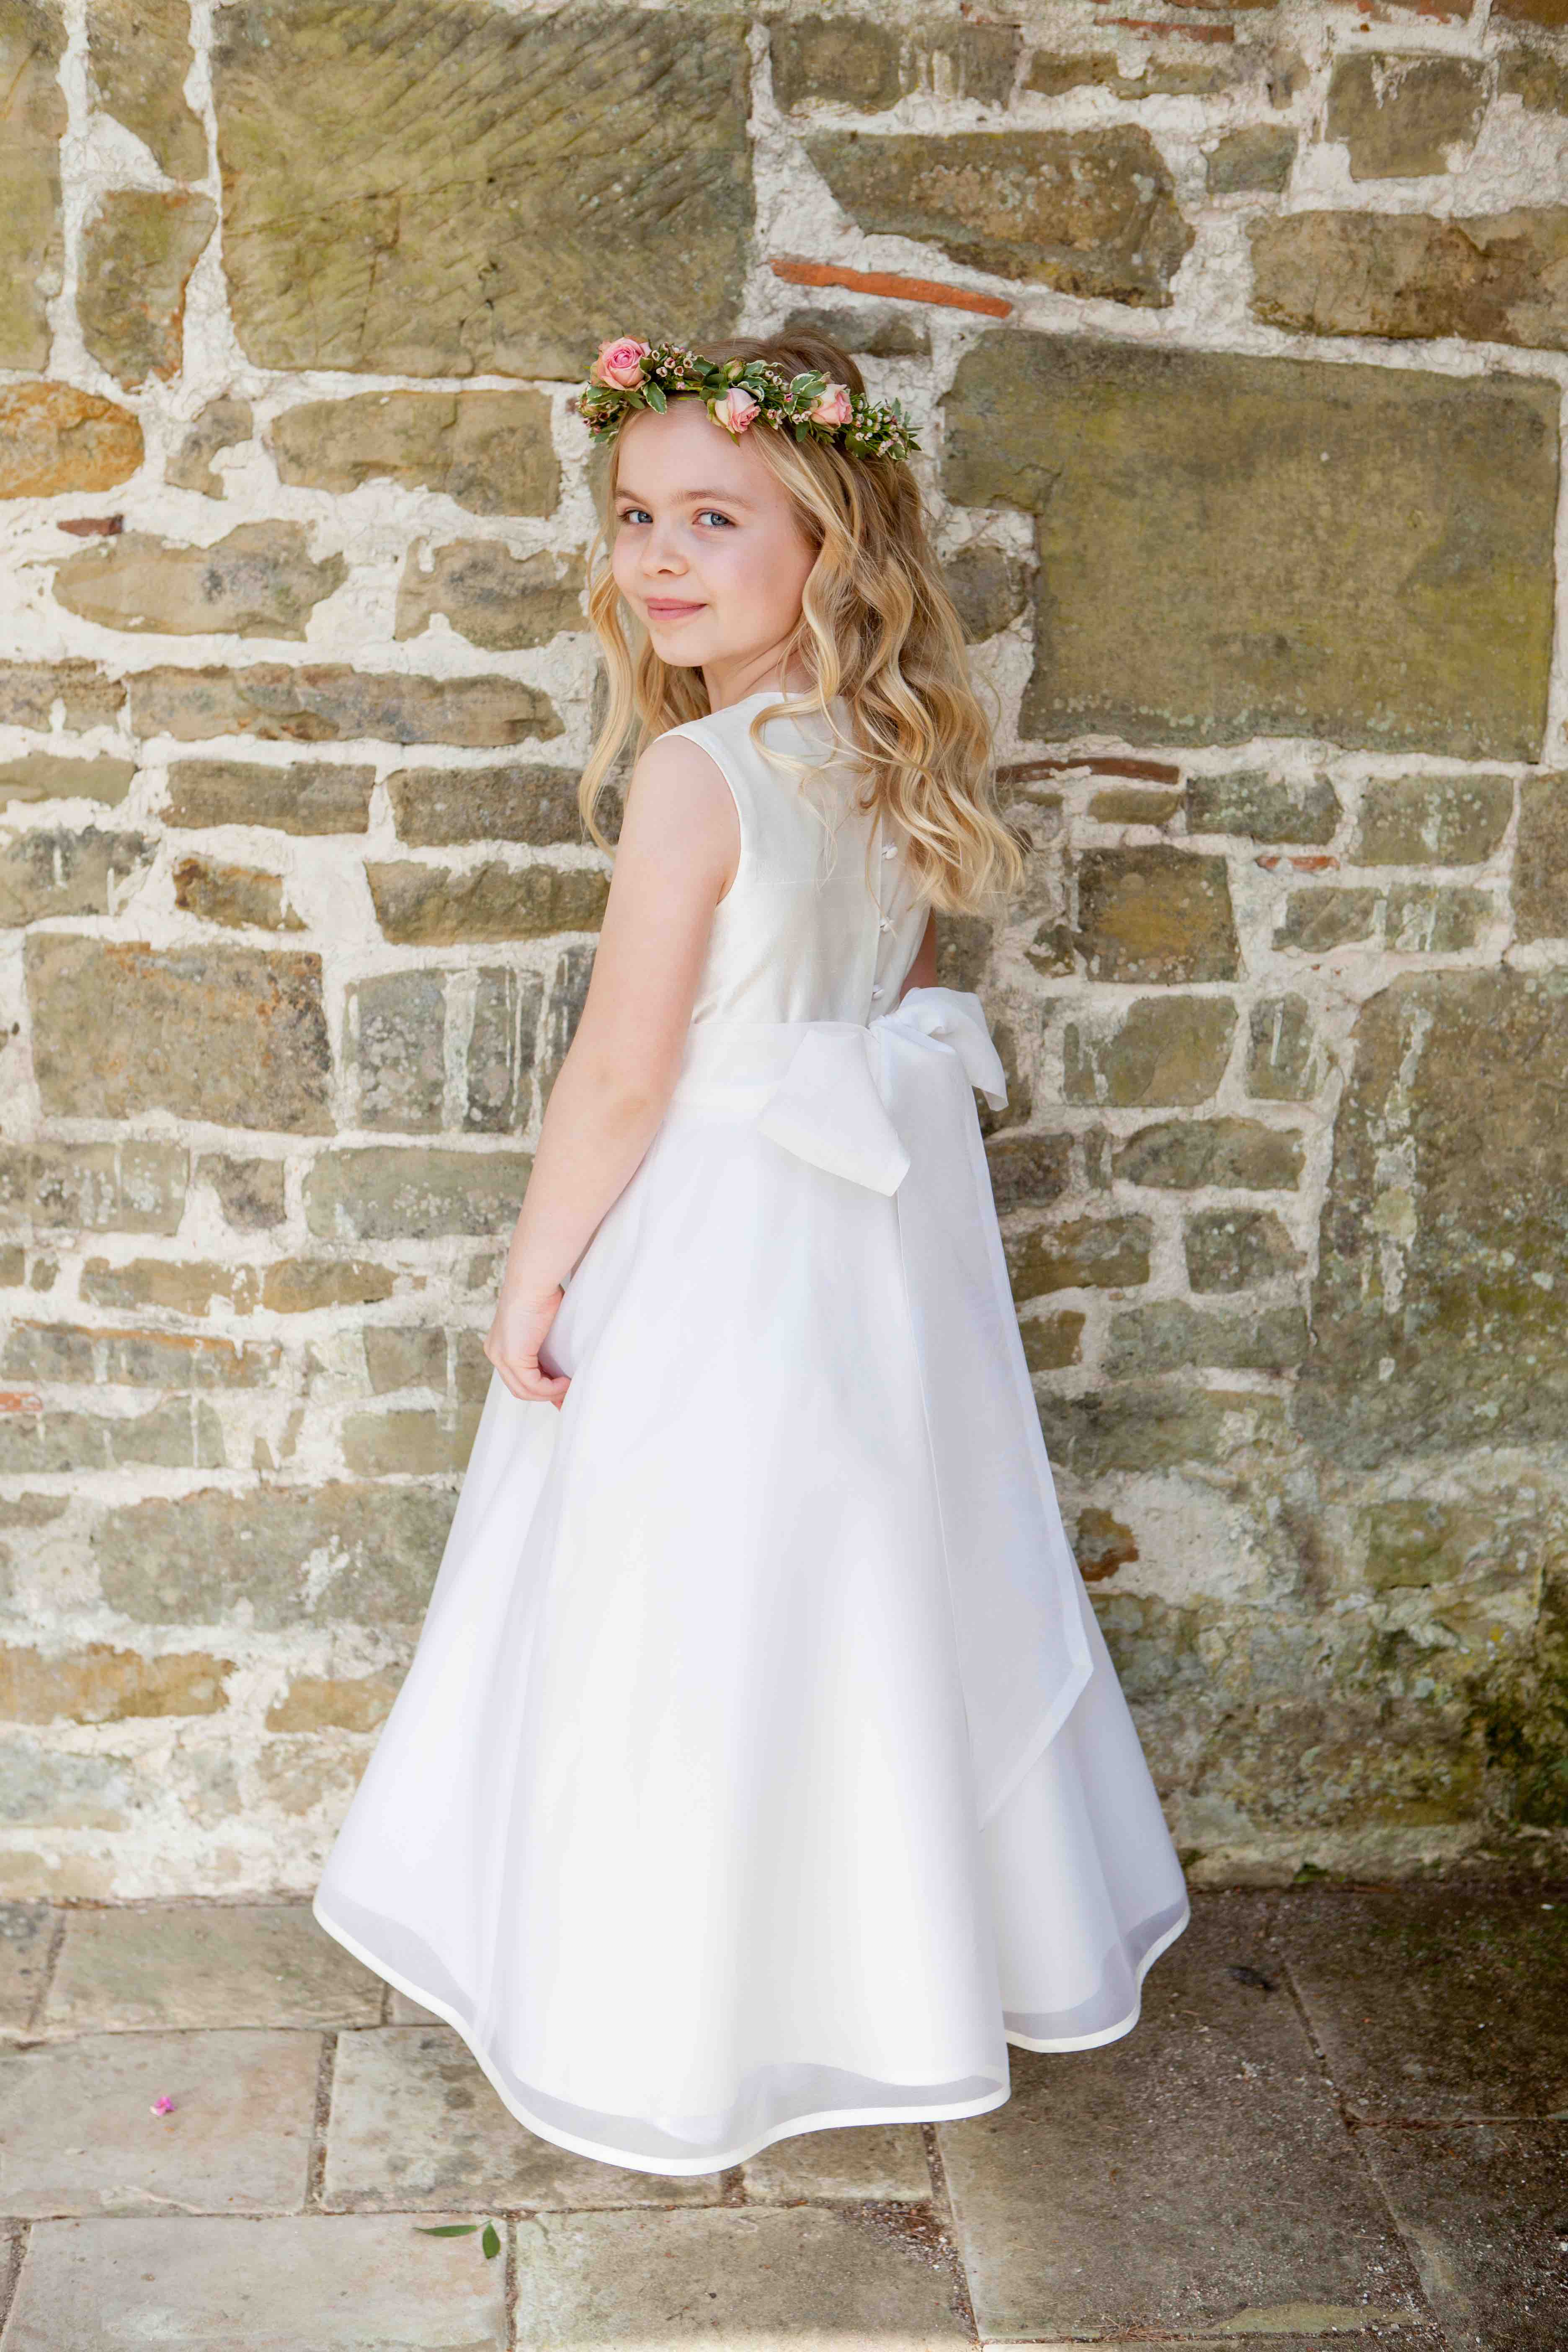 Flower power: This Tilly flower girl outfit is made to order by Sue Hill